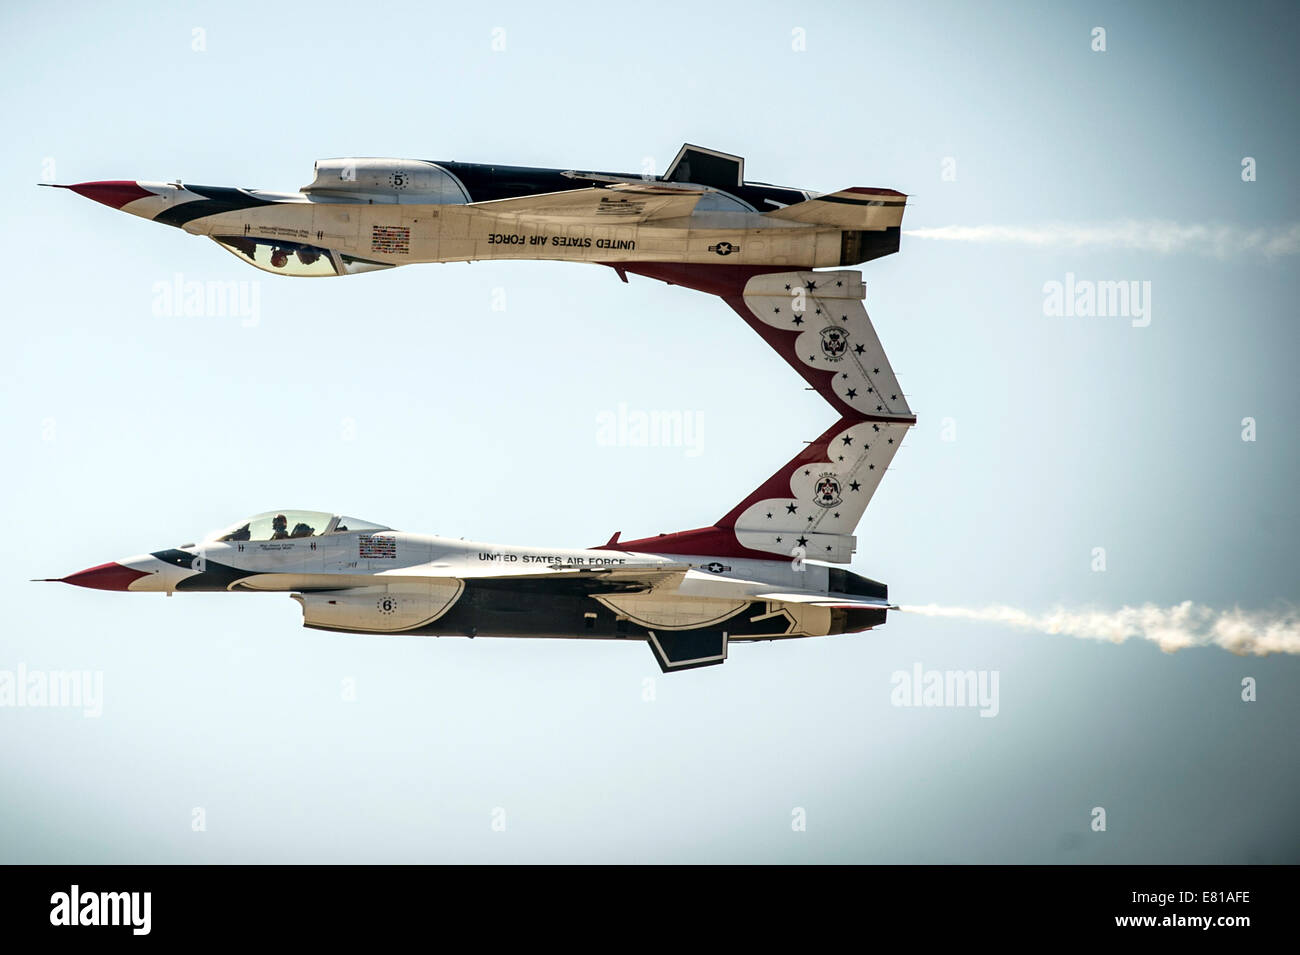 U.S. Air Force pilots with the Thunderbirds perform the calypso pass maneuver in F-16 Fighting Falcon aircraft Stock Photo